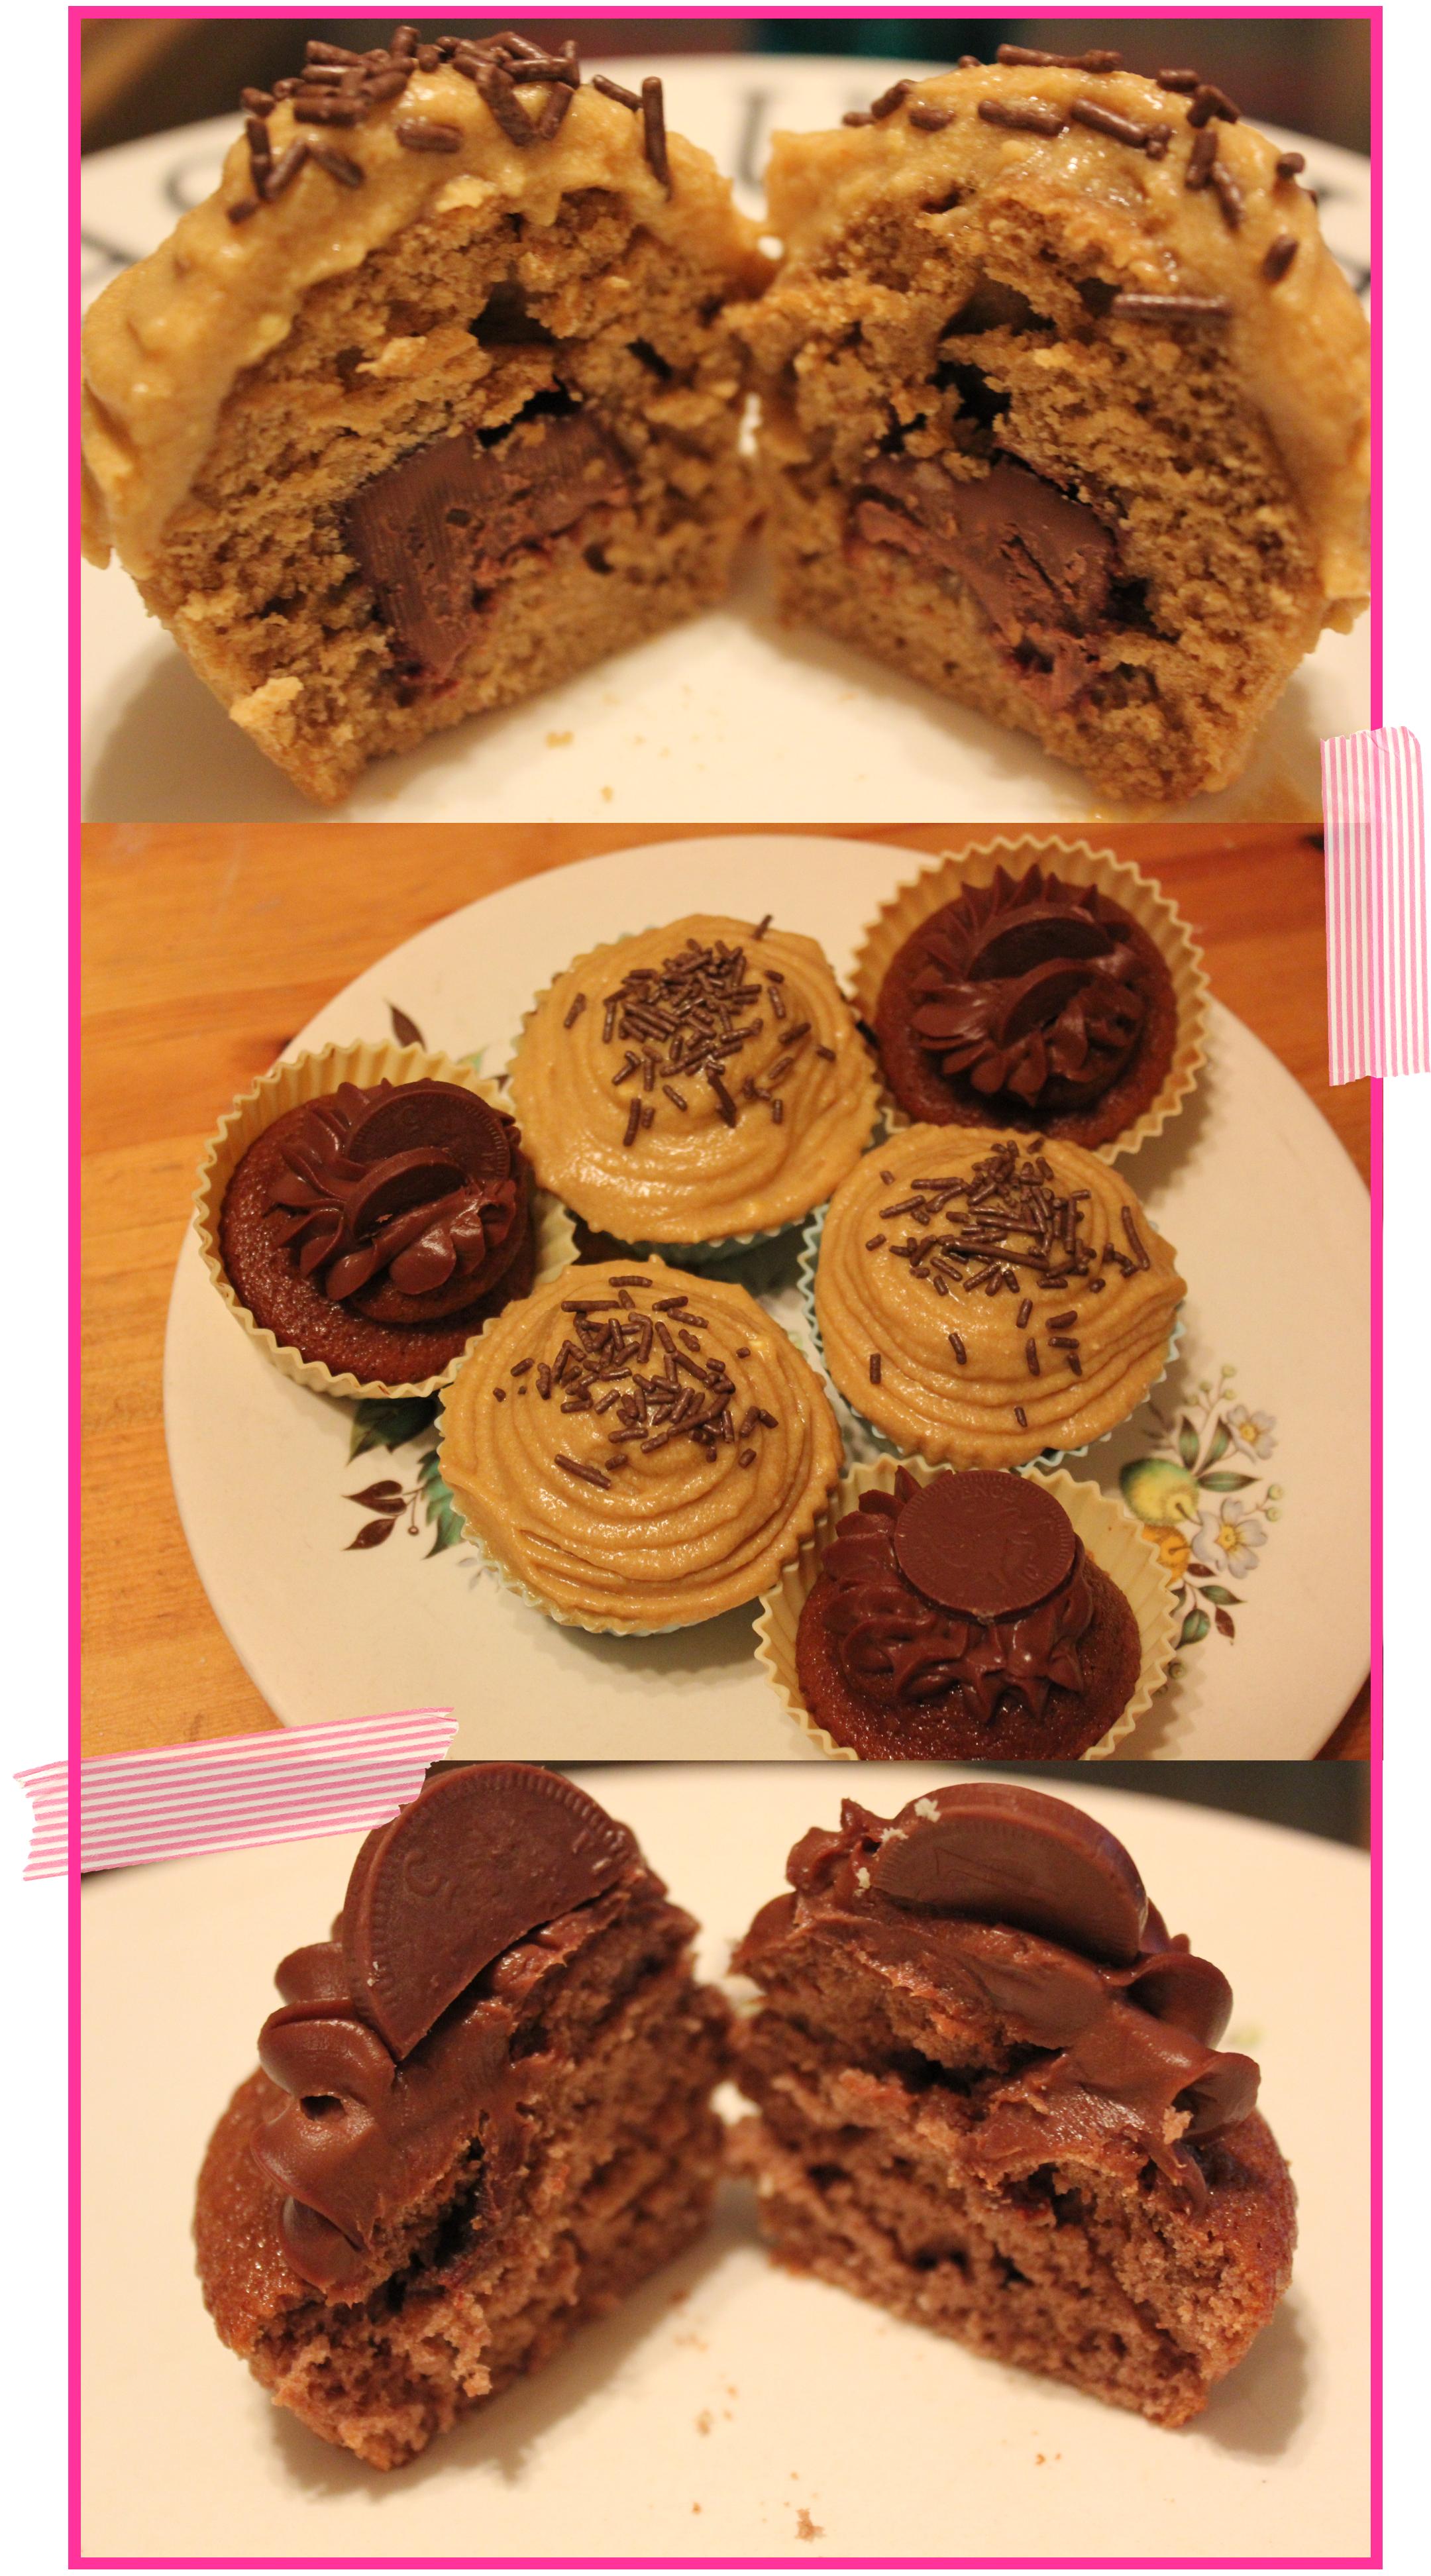 sweet treat sponge cakes filled cupcakes with chocolate surprise filling recipe